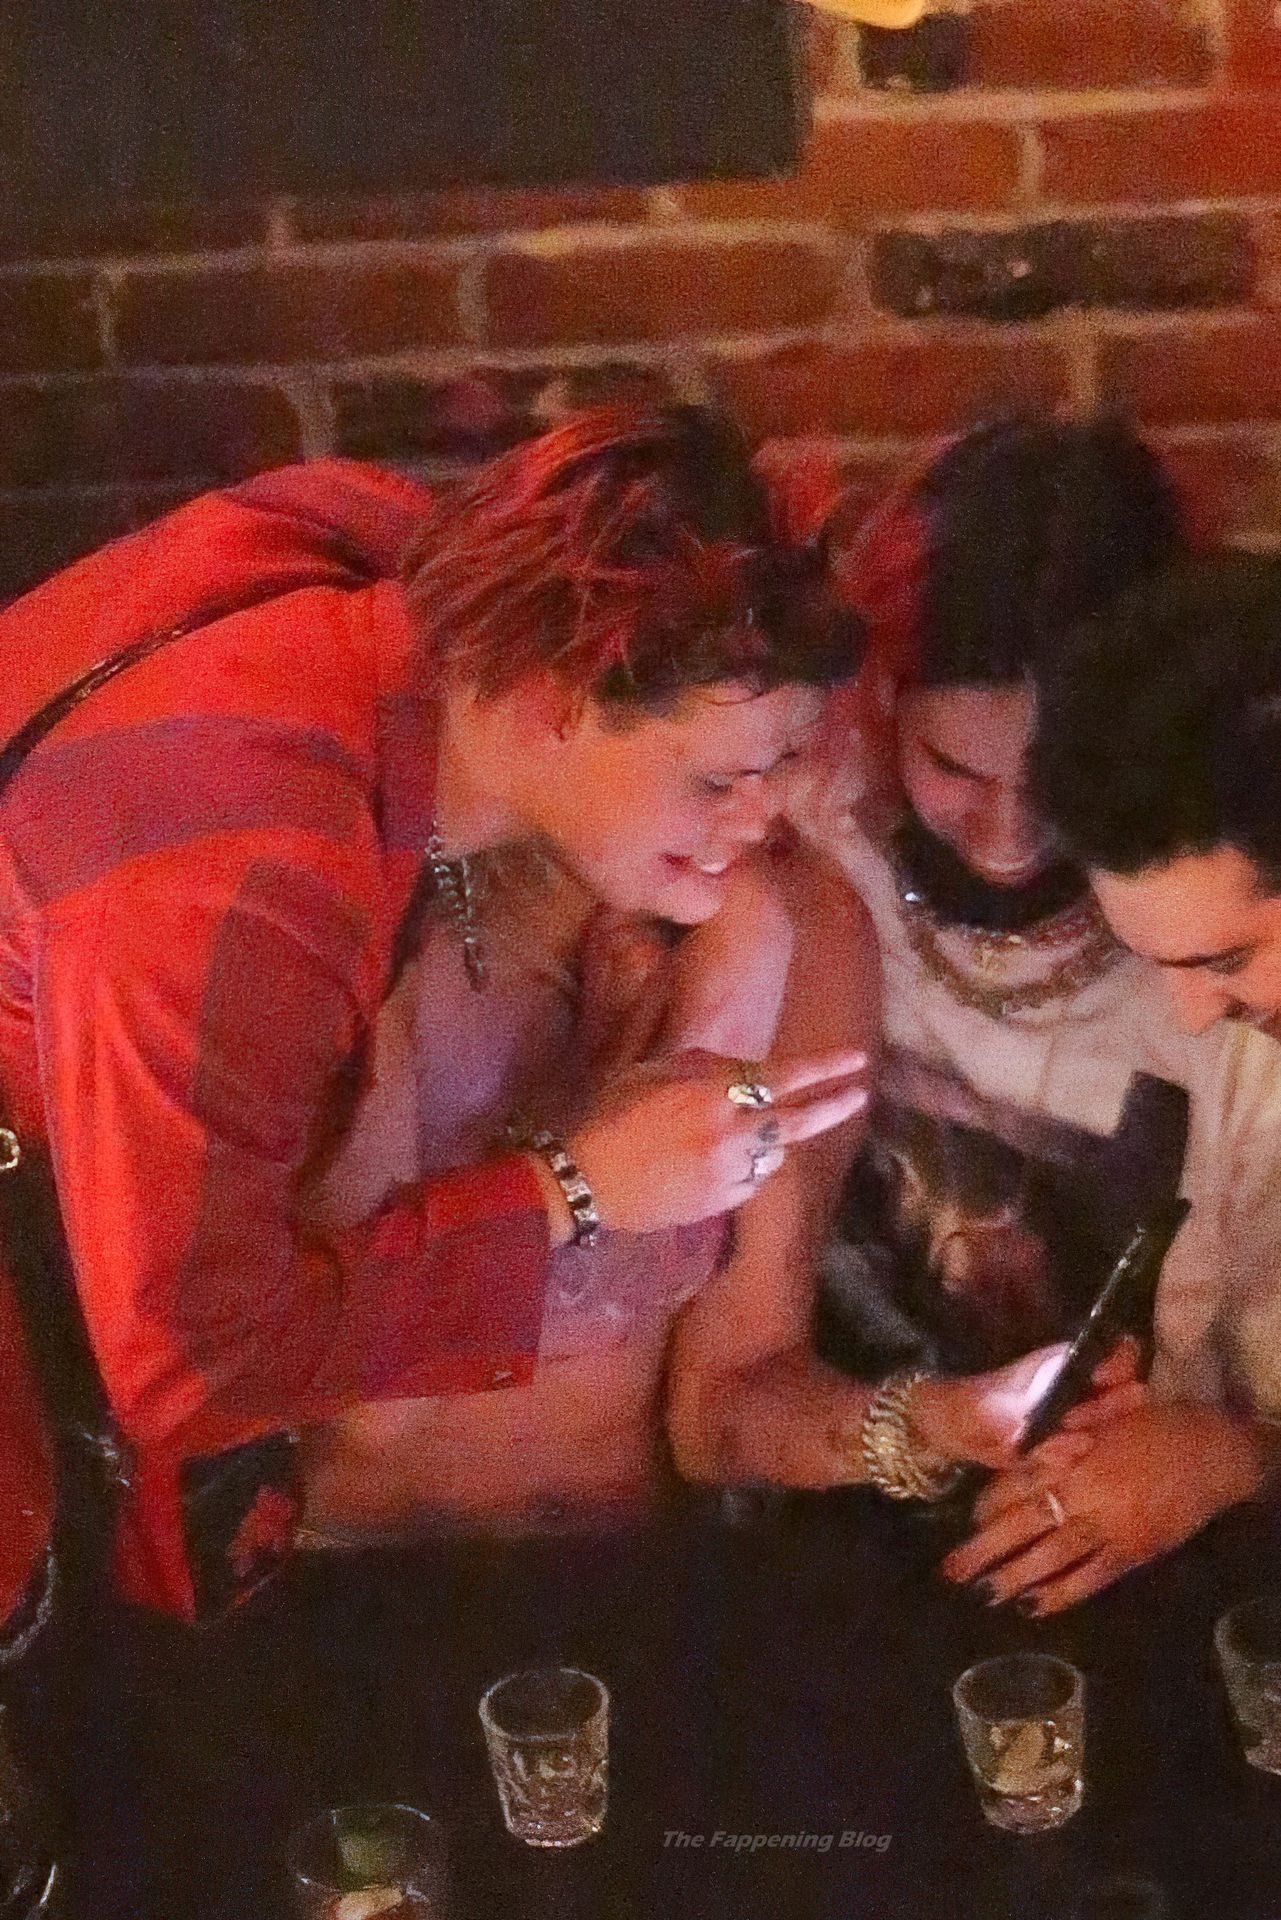 Miley Cyrus Sparks Dating Rumors as She is Seen Getting Very Frisky with Yungblud (64 Photo
s)